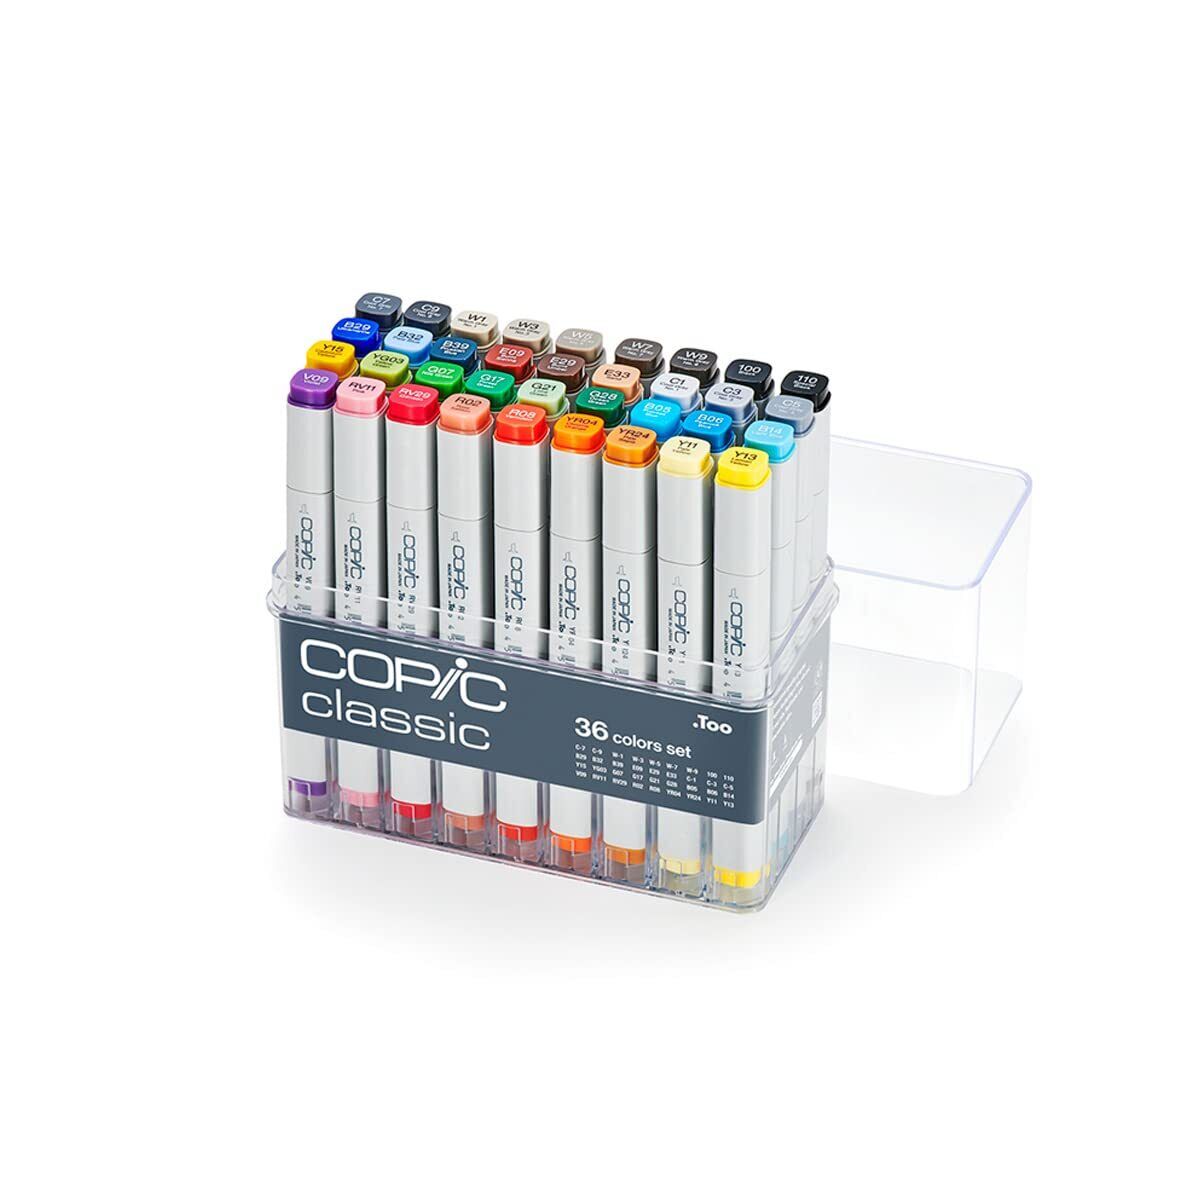 Copic Classic 36 Color Set CB36V2 Illustration Marker Hobby Picture